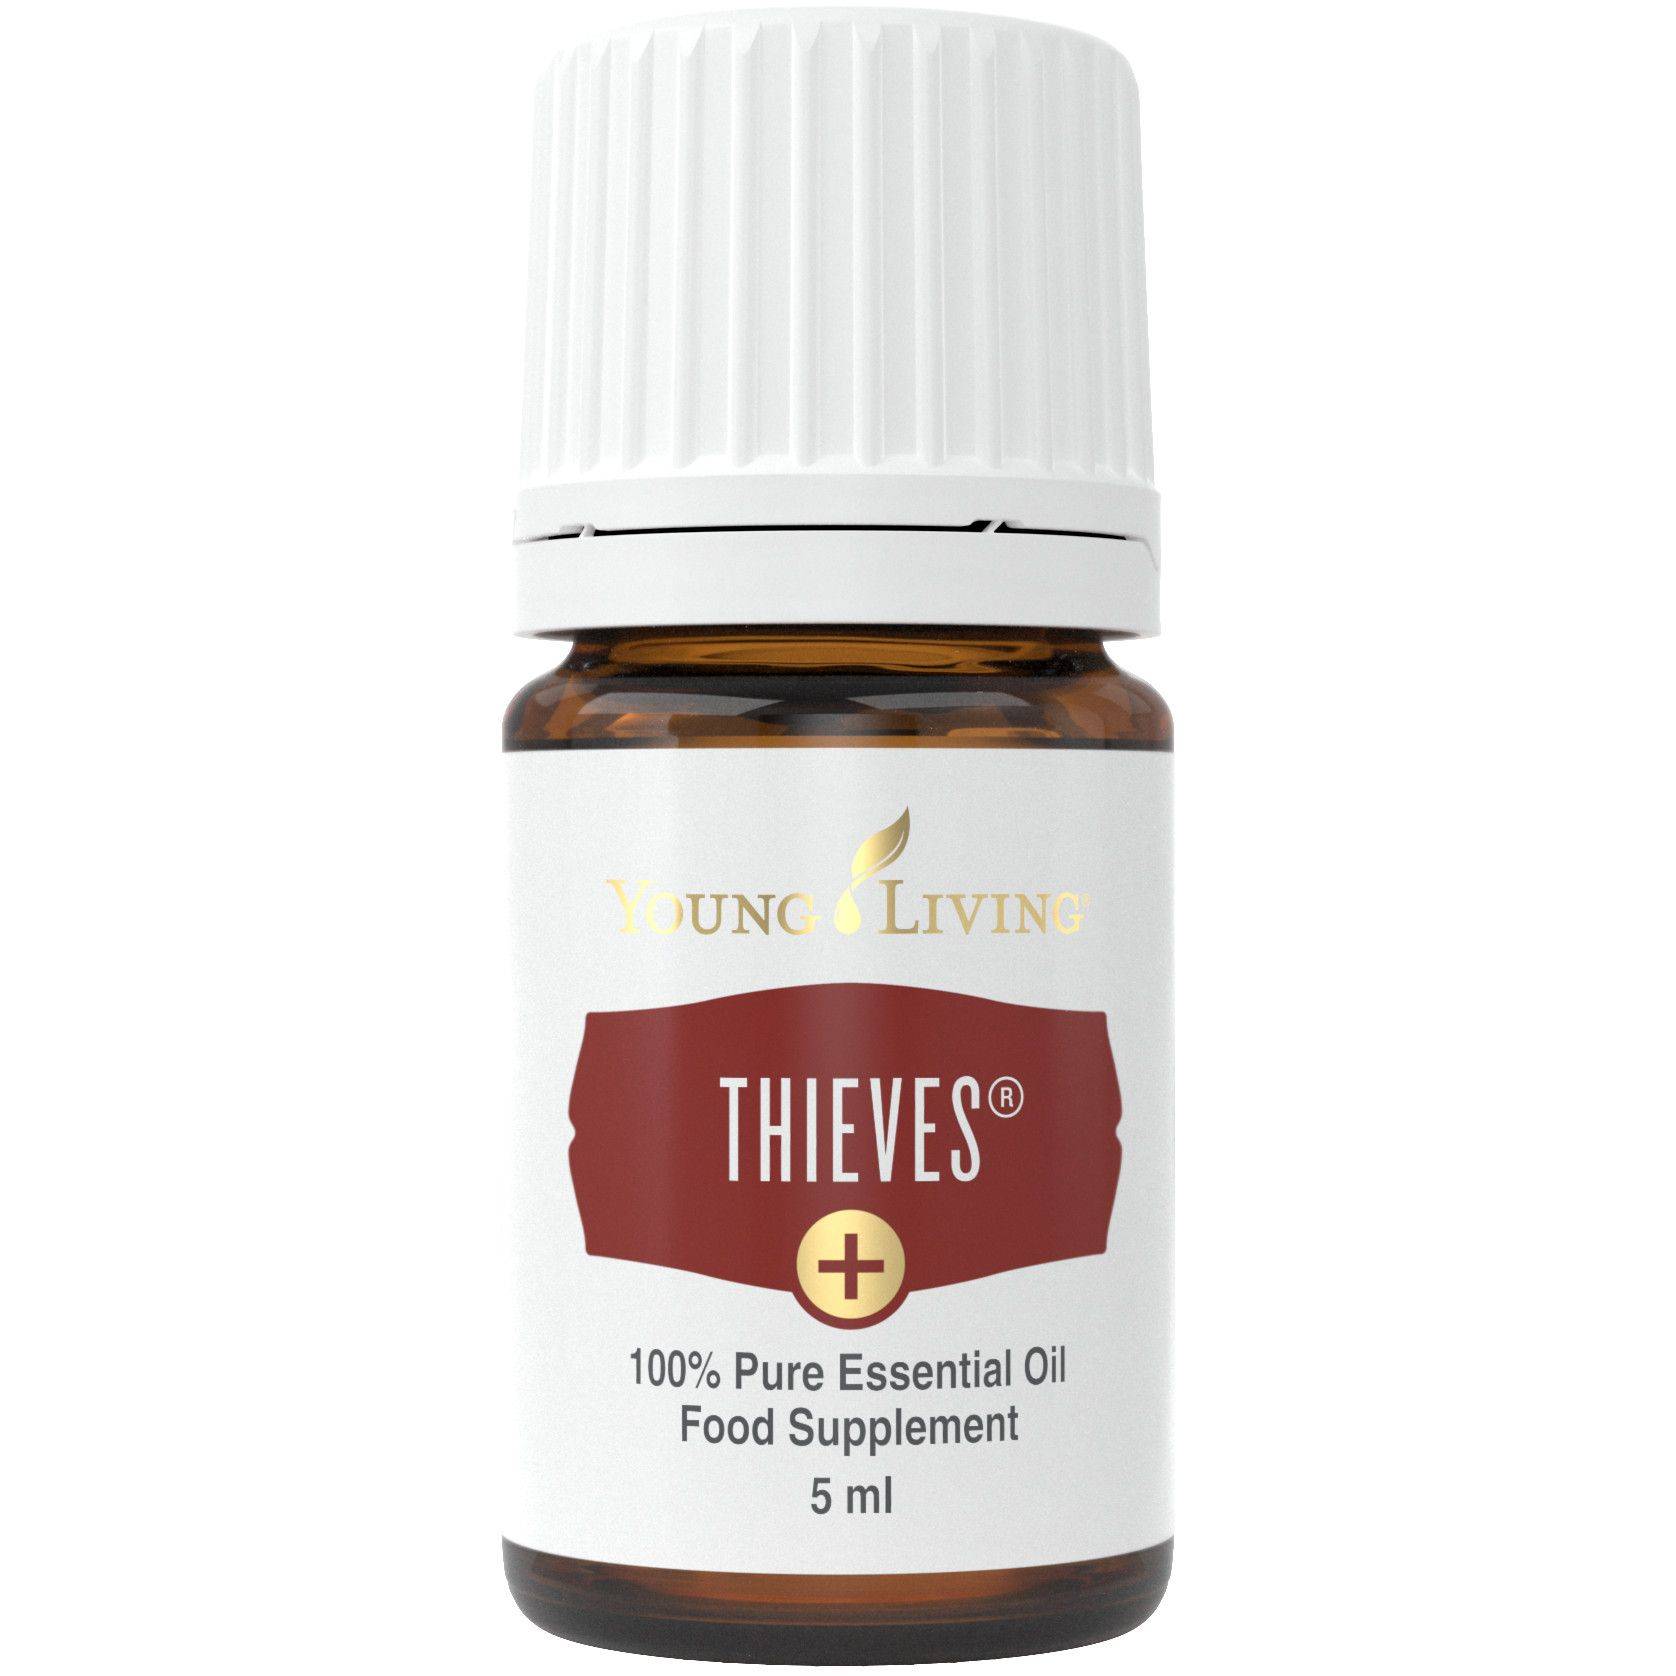 Ulei esential thieves plus 5ml - young living